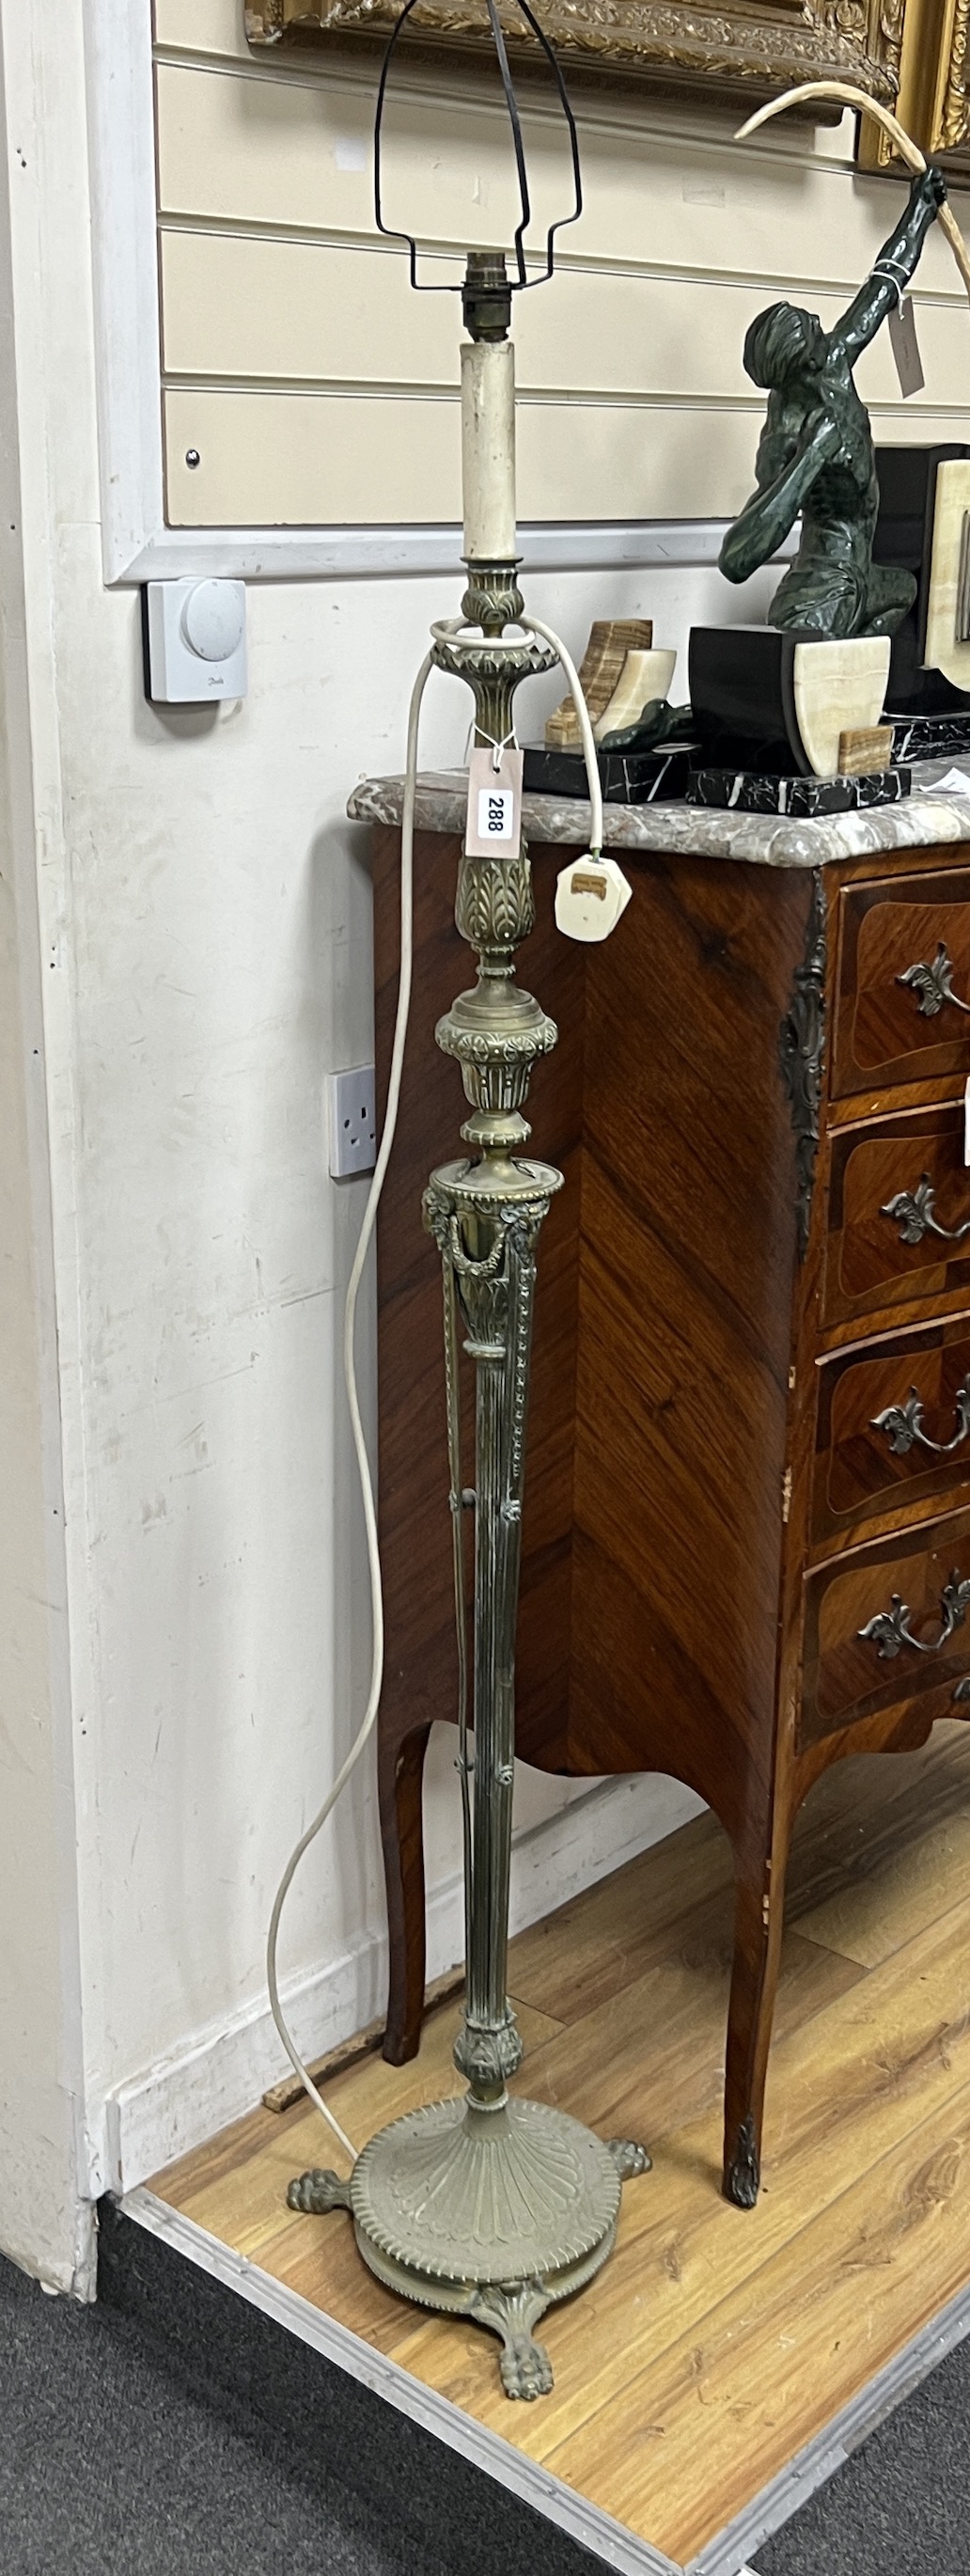 An Empire style brass lamp standard, height including fittings 150cm